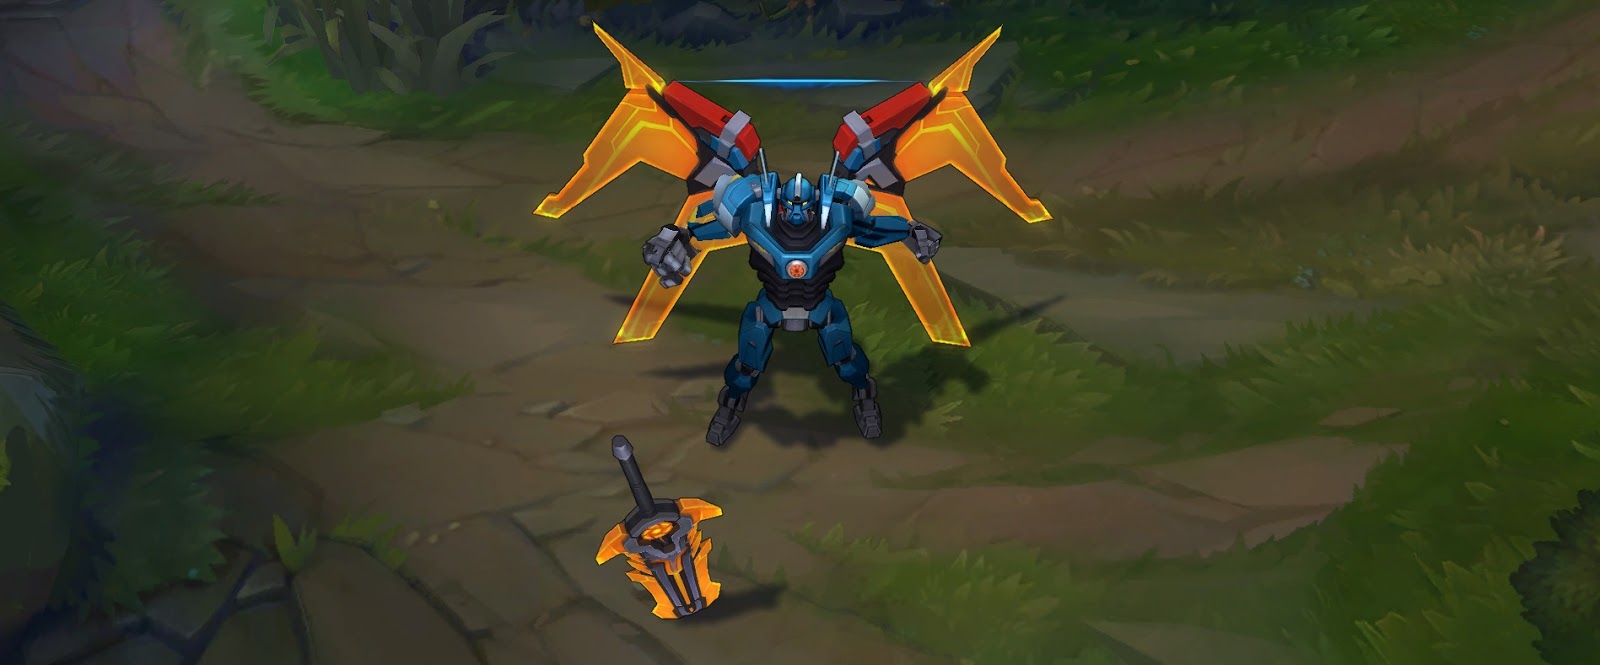 mecha aatrox skin for league of legends ingame picture